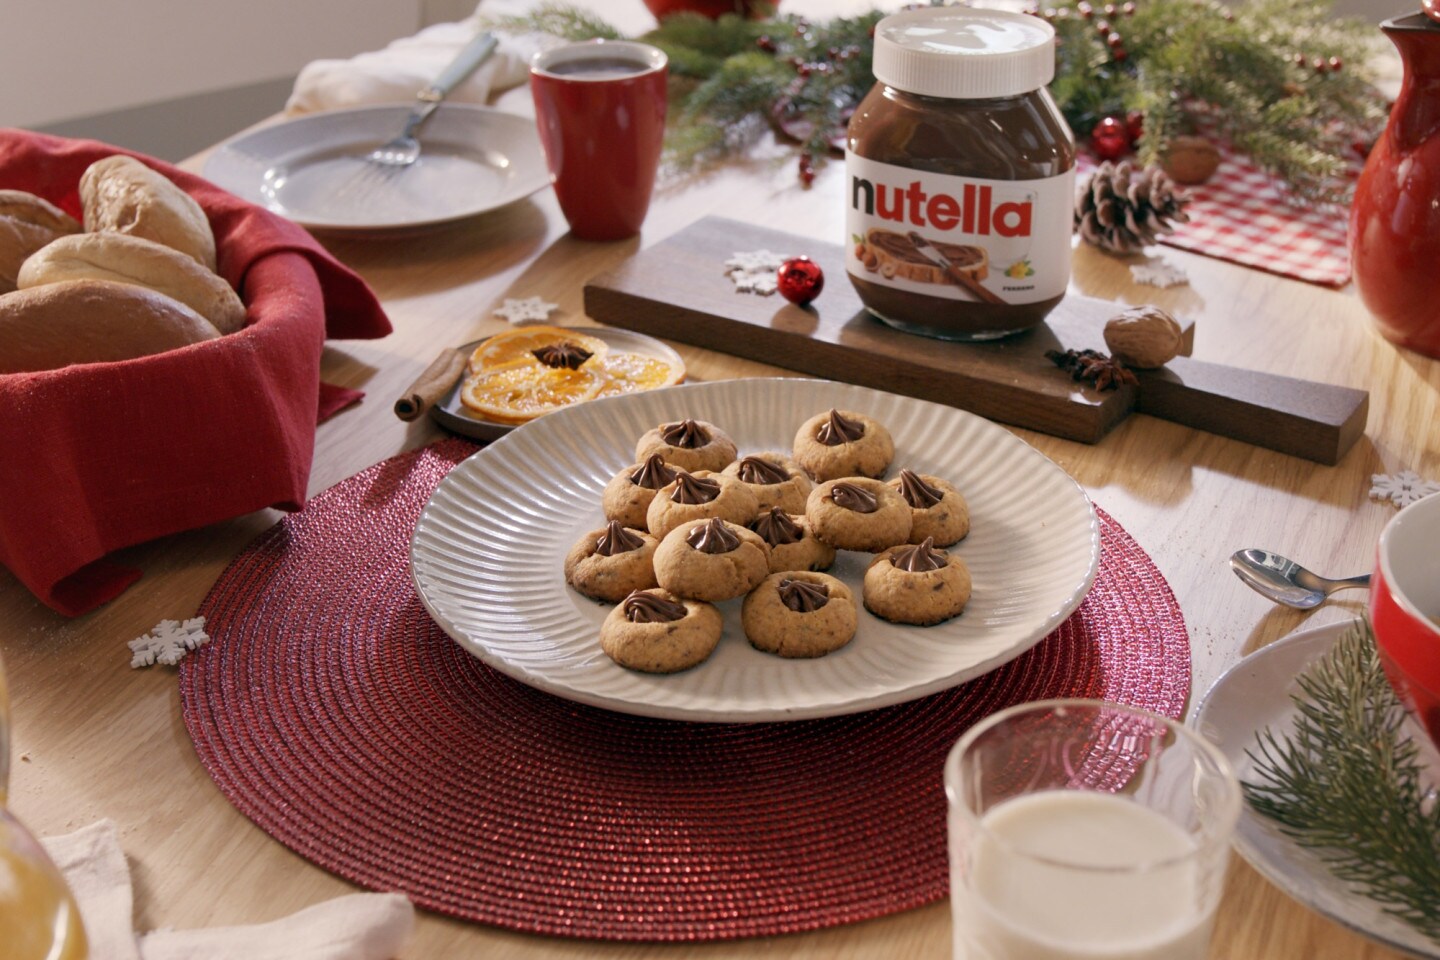 Thumbprint Cookies By Nutella®